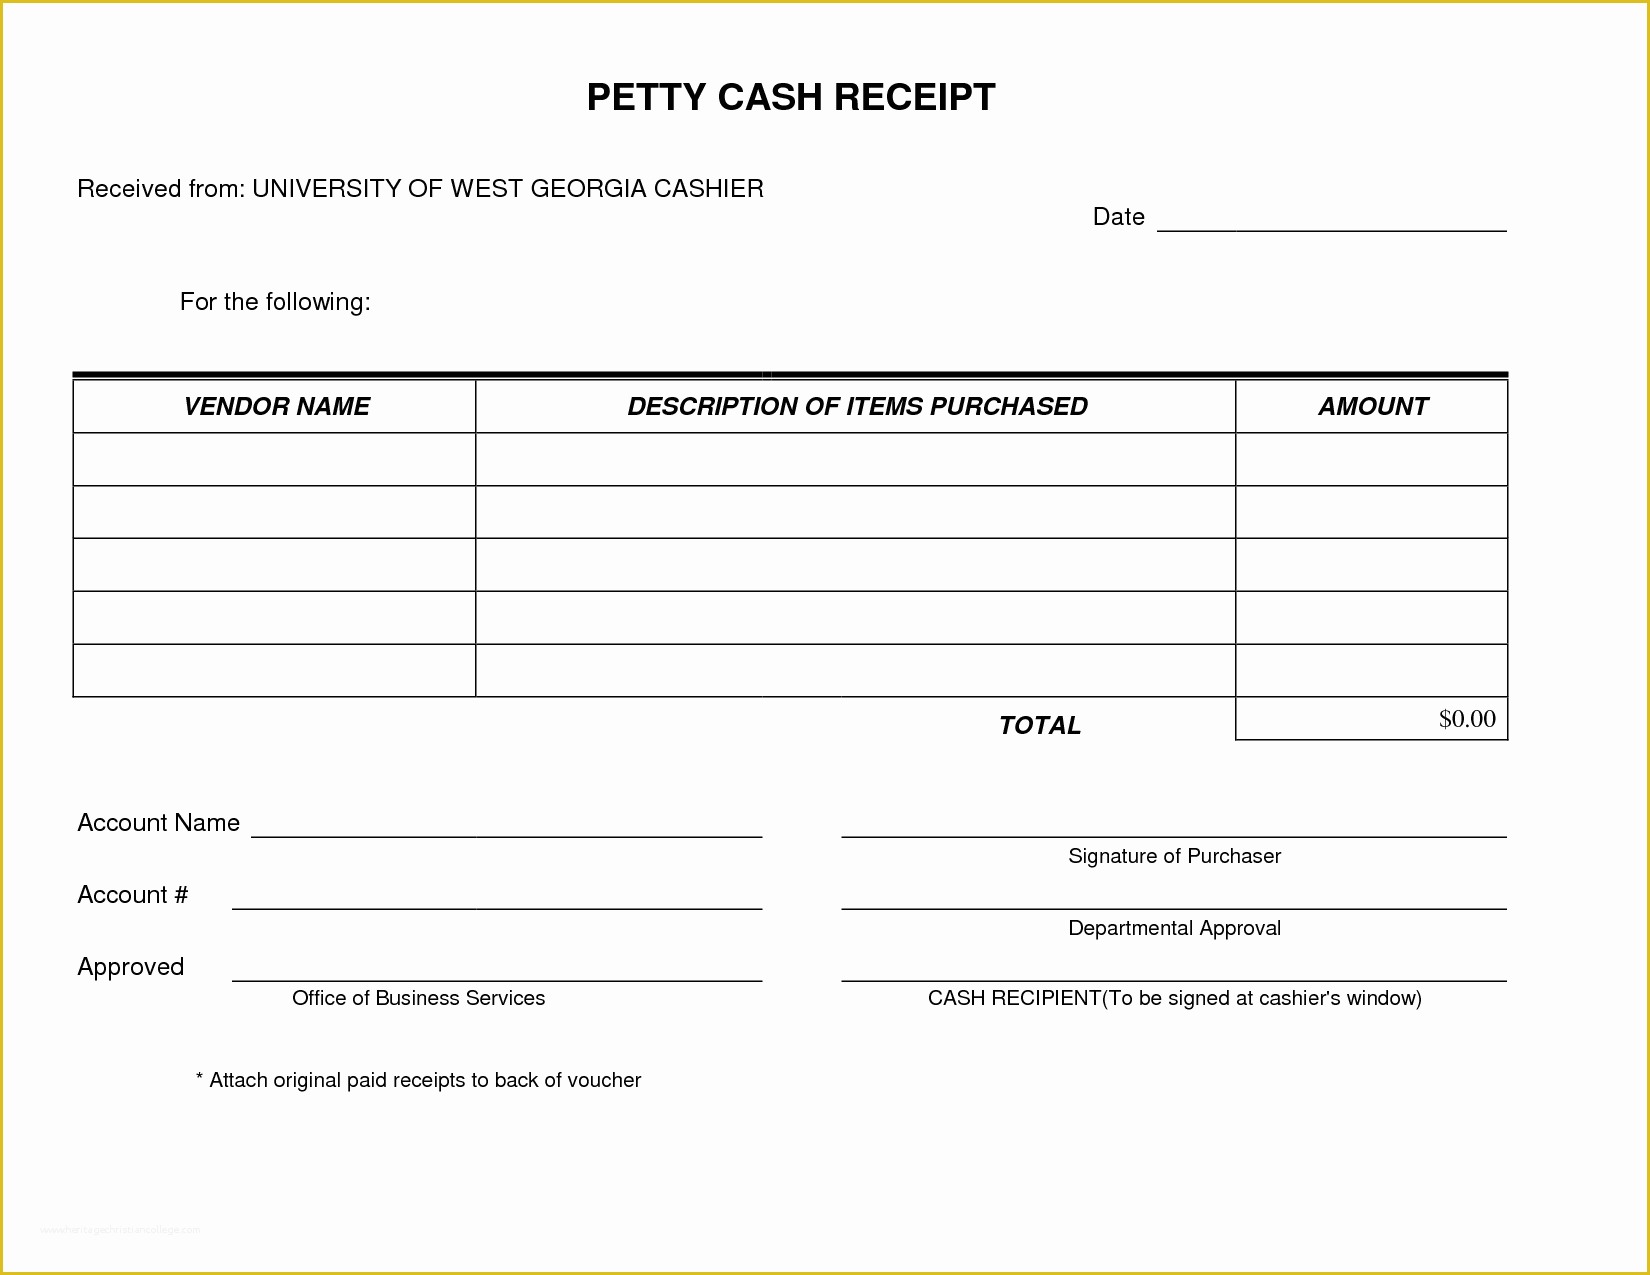 Free Petty Cash Receipt Template Of Petty Cash Receipt form Template Very Simple and Easy to